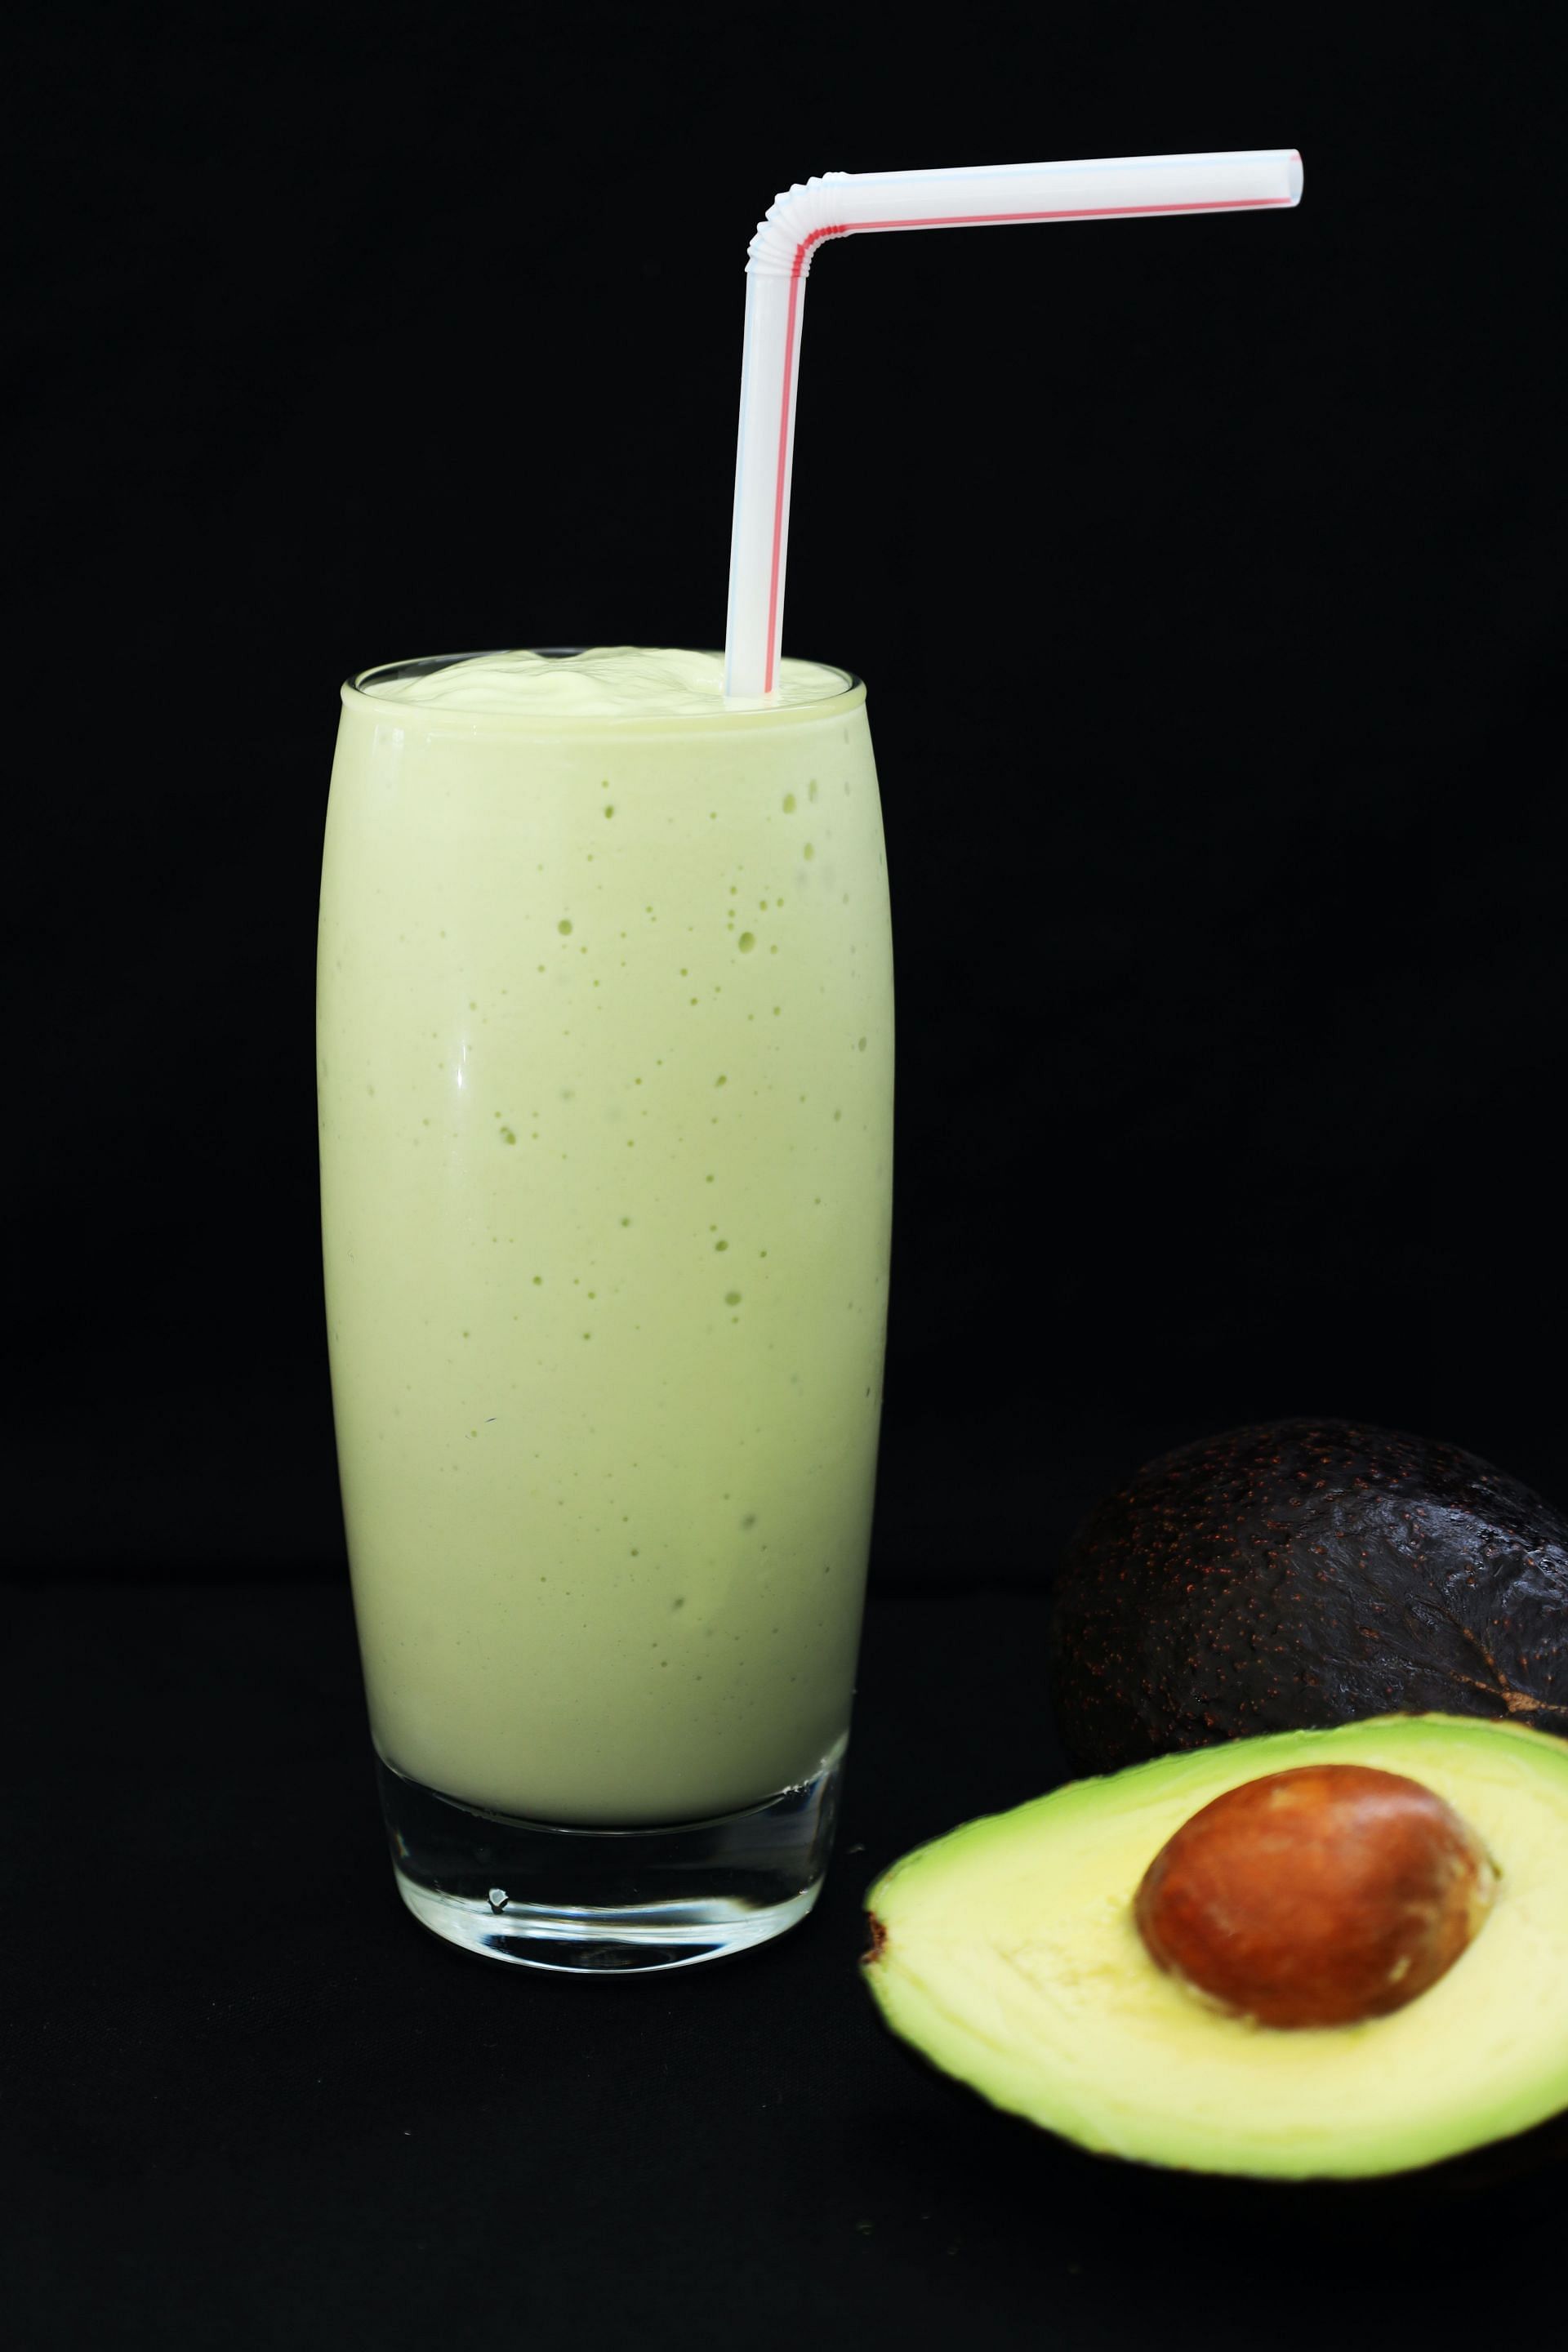 Drinking smoothies with this fruit adds creaminess and healthy fats to diets (Image via pexels0